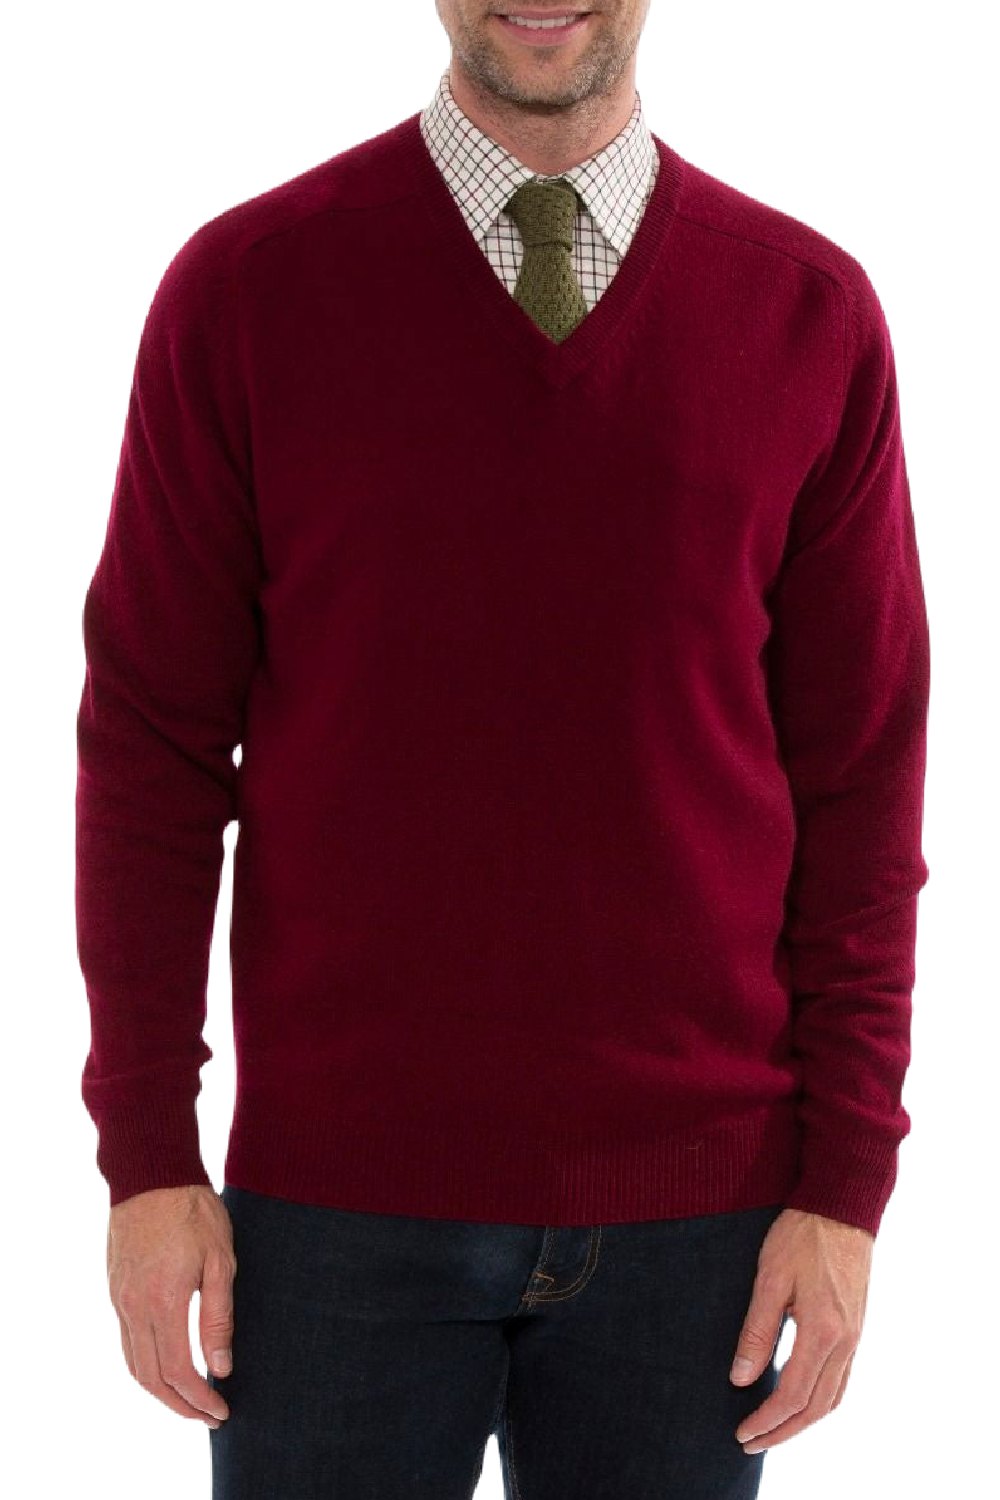 Alan Paine Streetly Lambswool V Neck Jumper in Bordeaux 